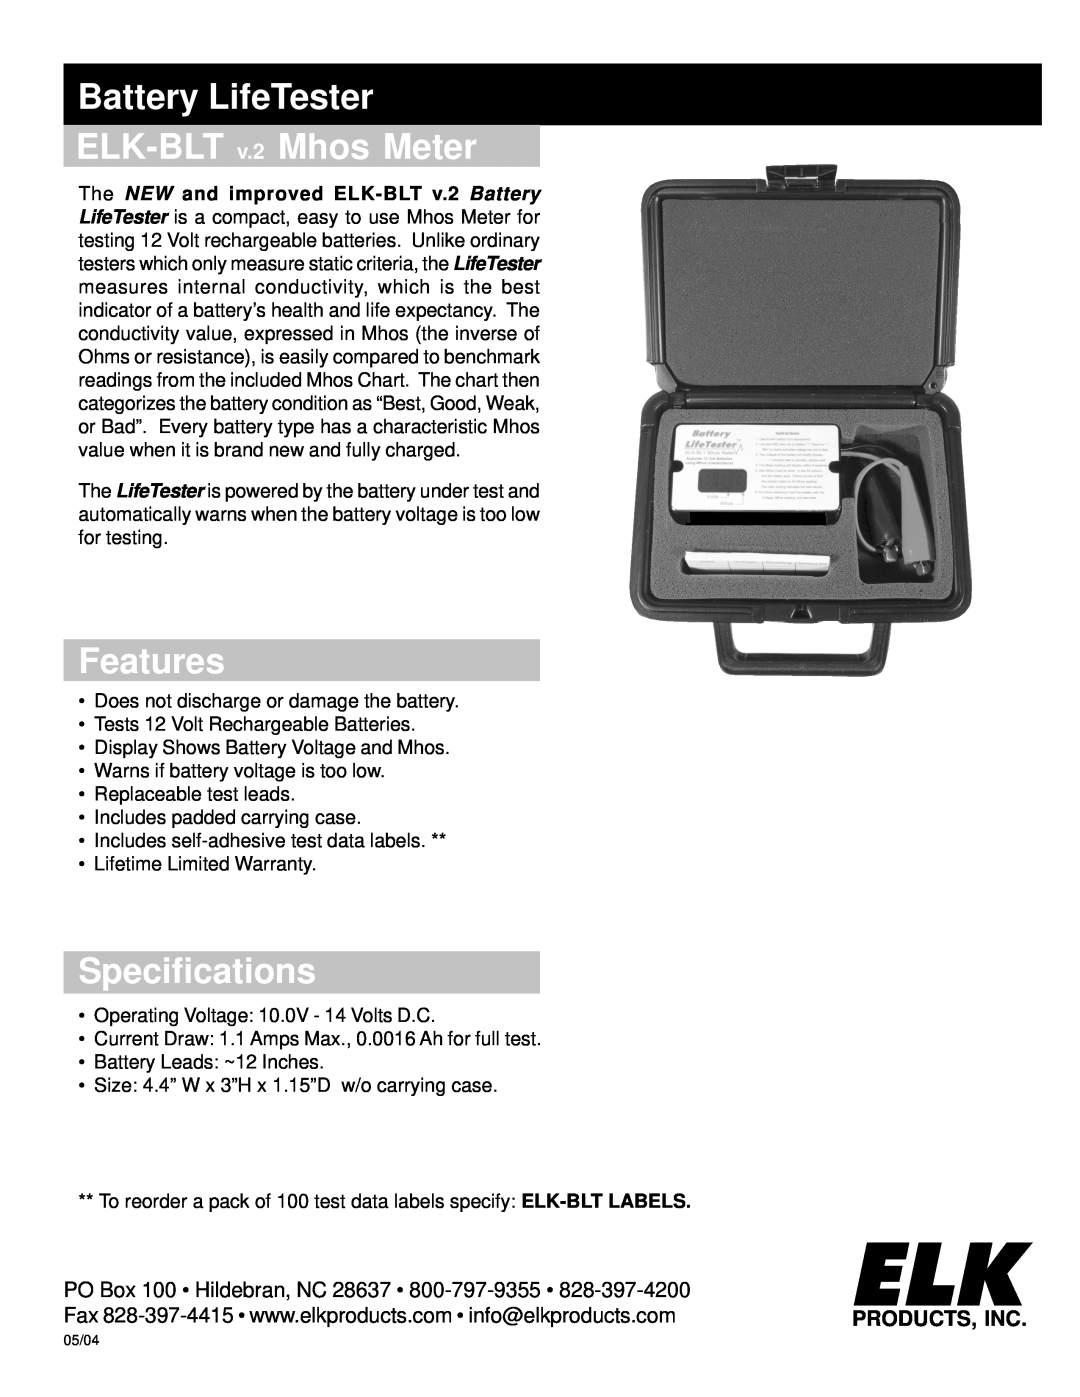 Elk specifications Battery LifeTester ELK-BLT v.2 Mhos Meter, Features, Specifications, Products, Inc 